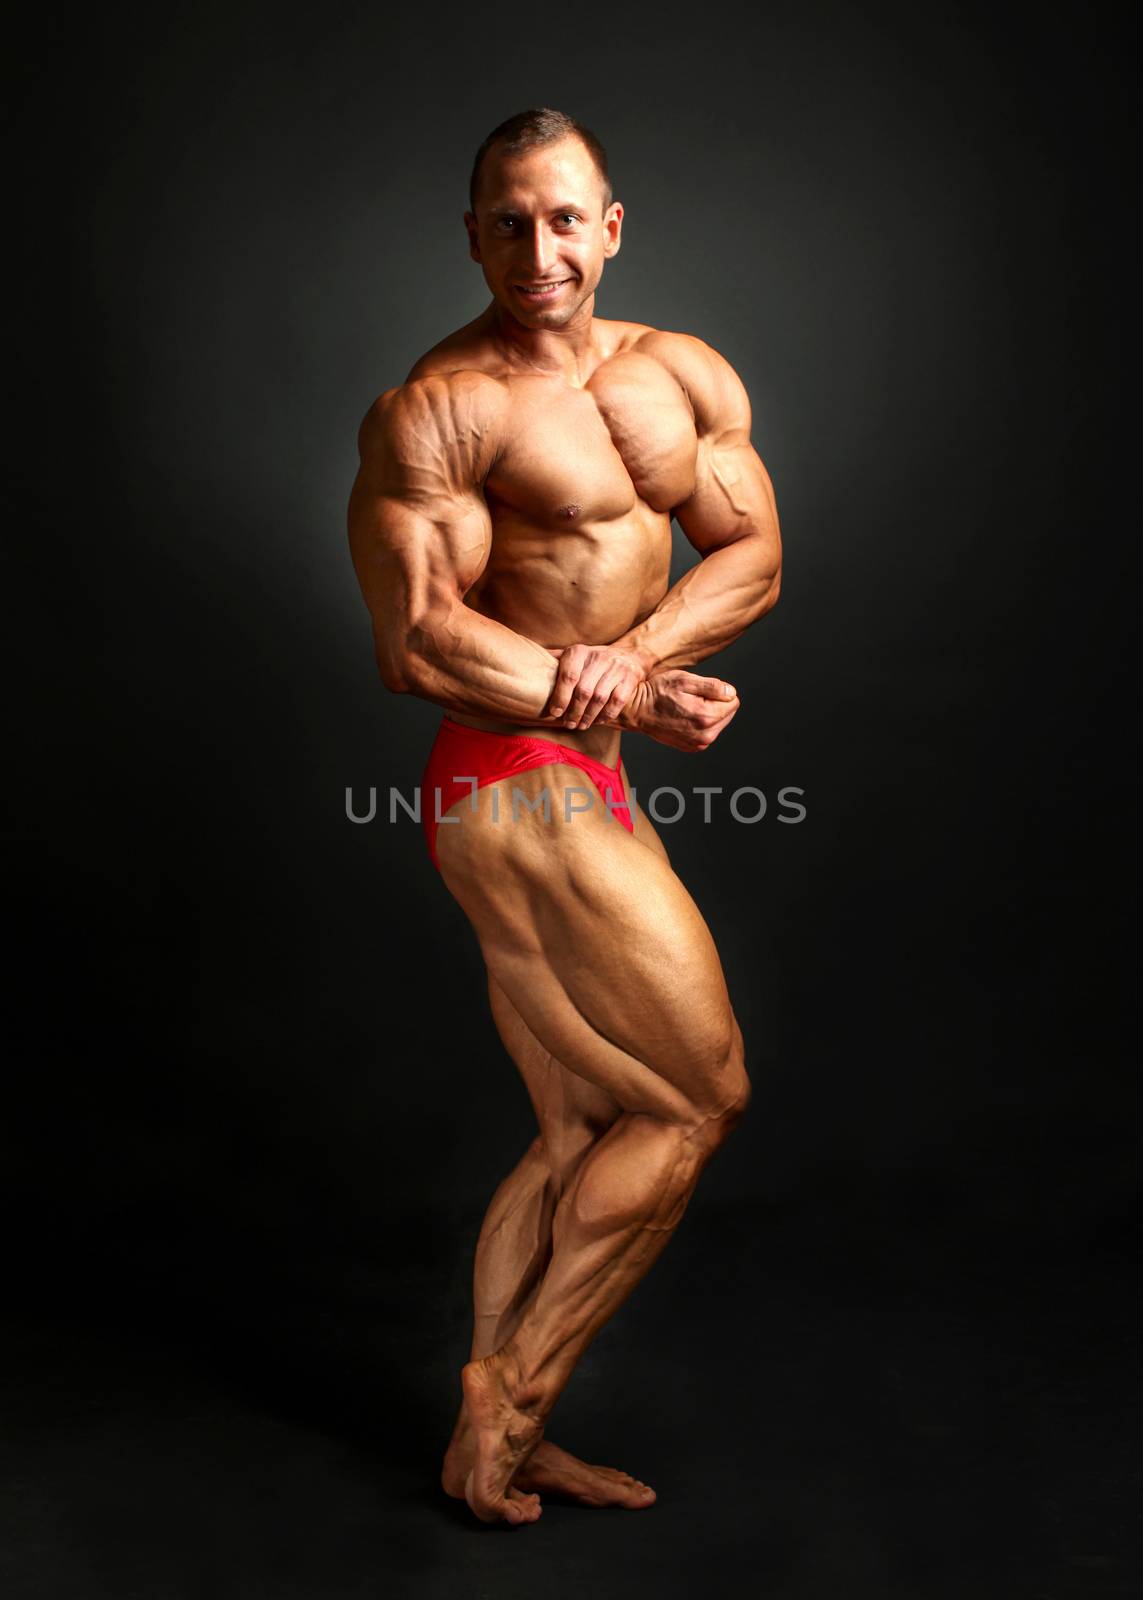 Studio shot of male bodybuilder posing, flexing and showing biceps and legs, with black background.